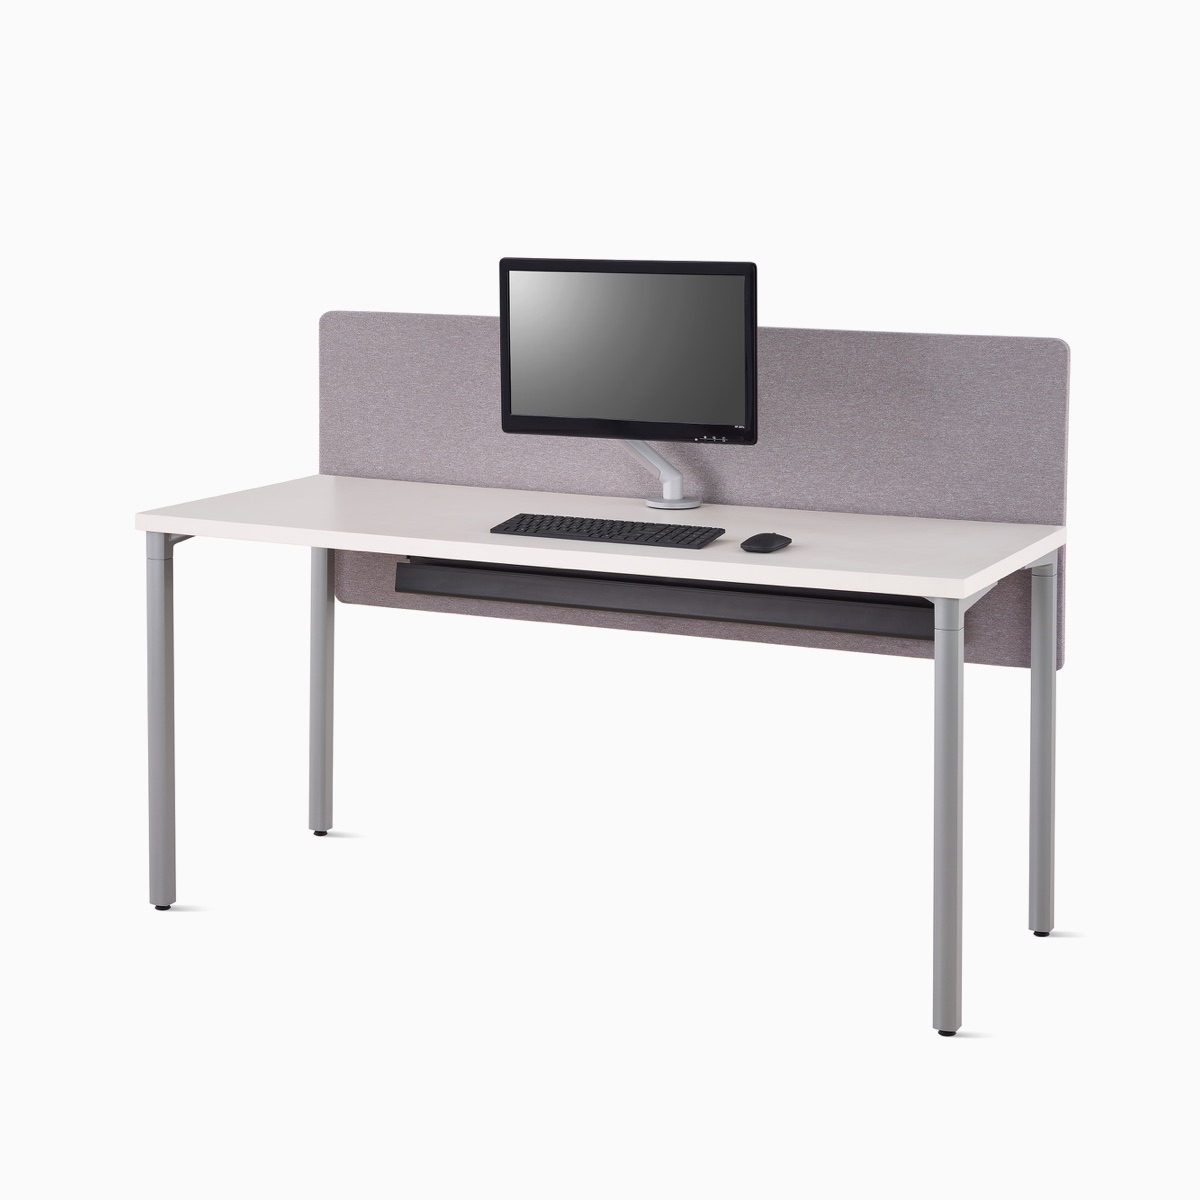 Viewed at an angle, a white Everywhere desk with a gray fabric, surface-attached privacy screen with a screen-attached cable trough below the desk.